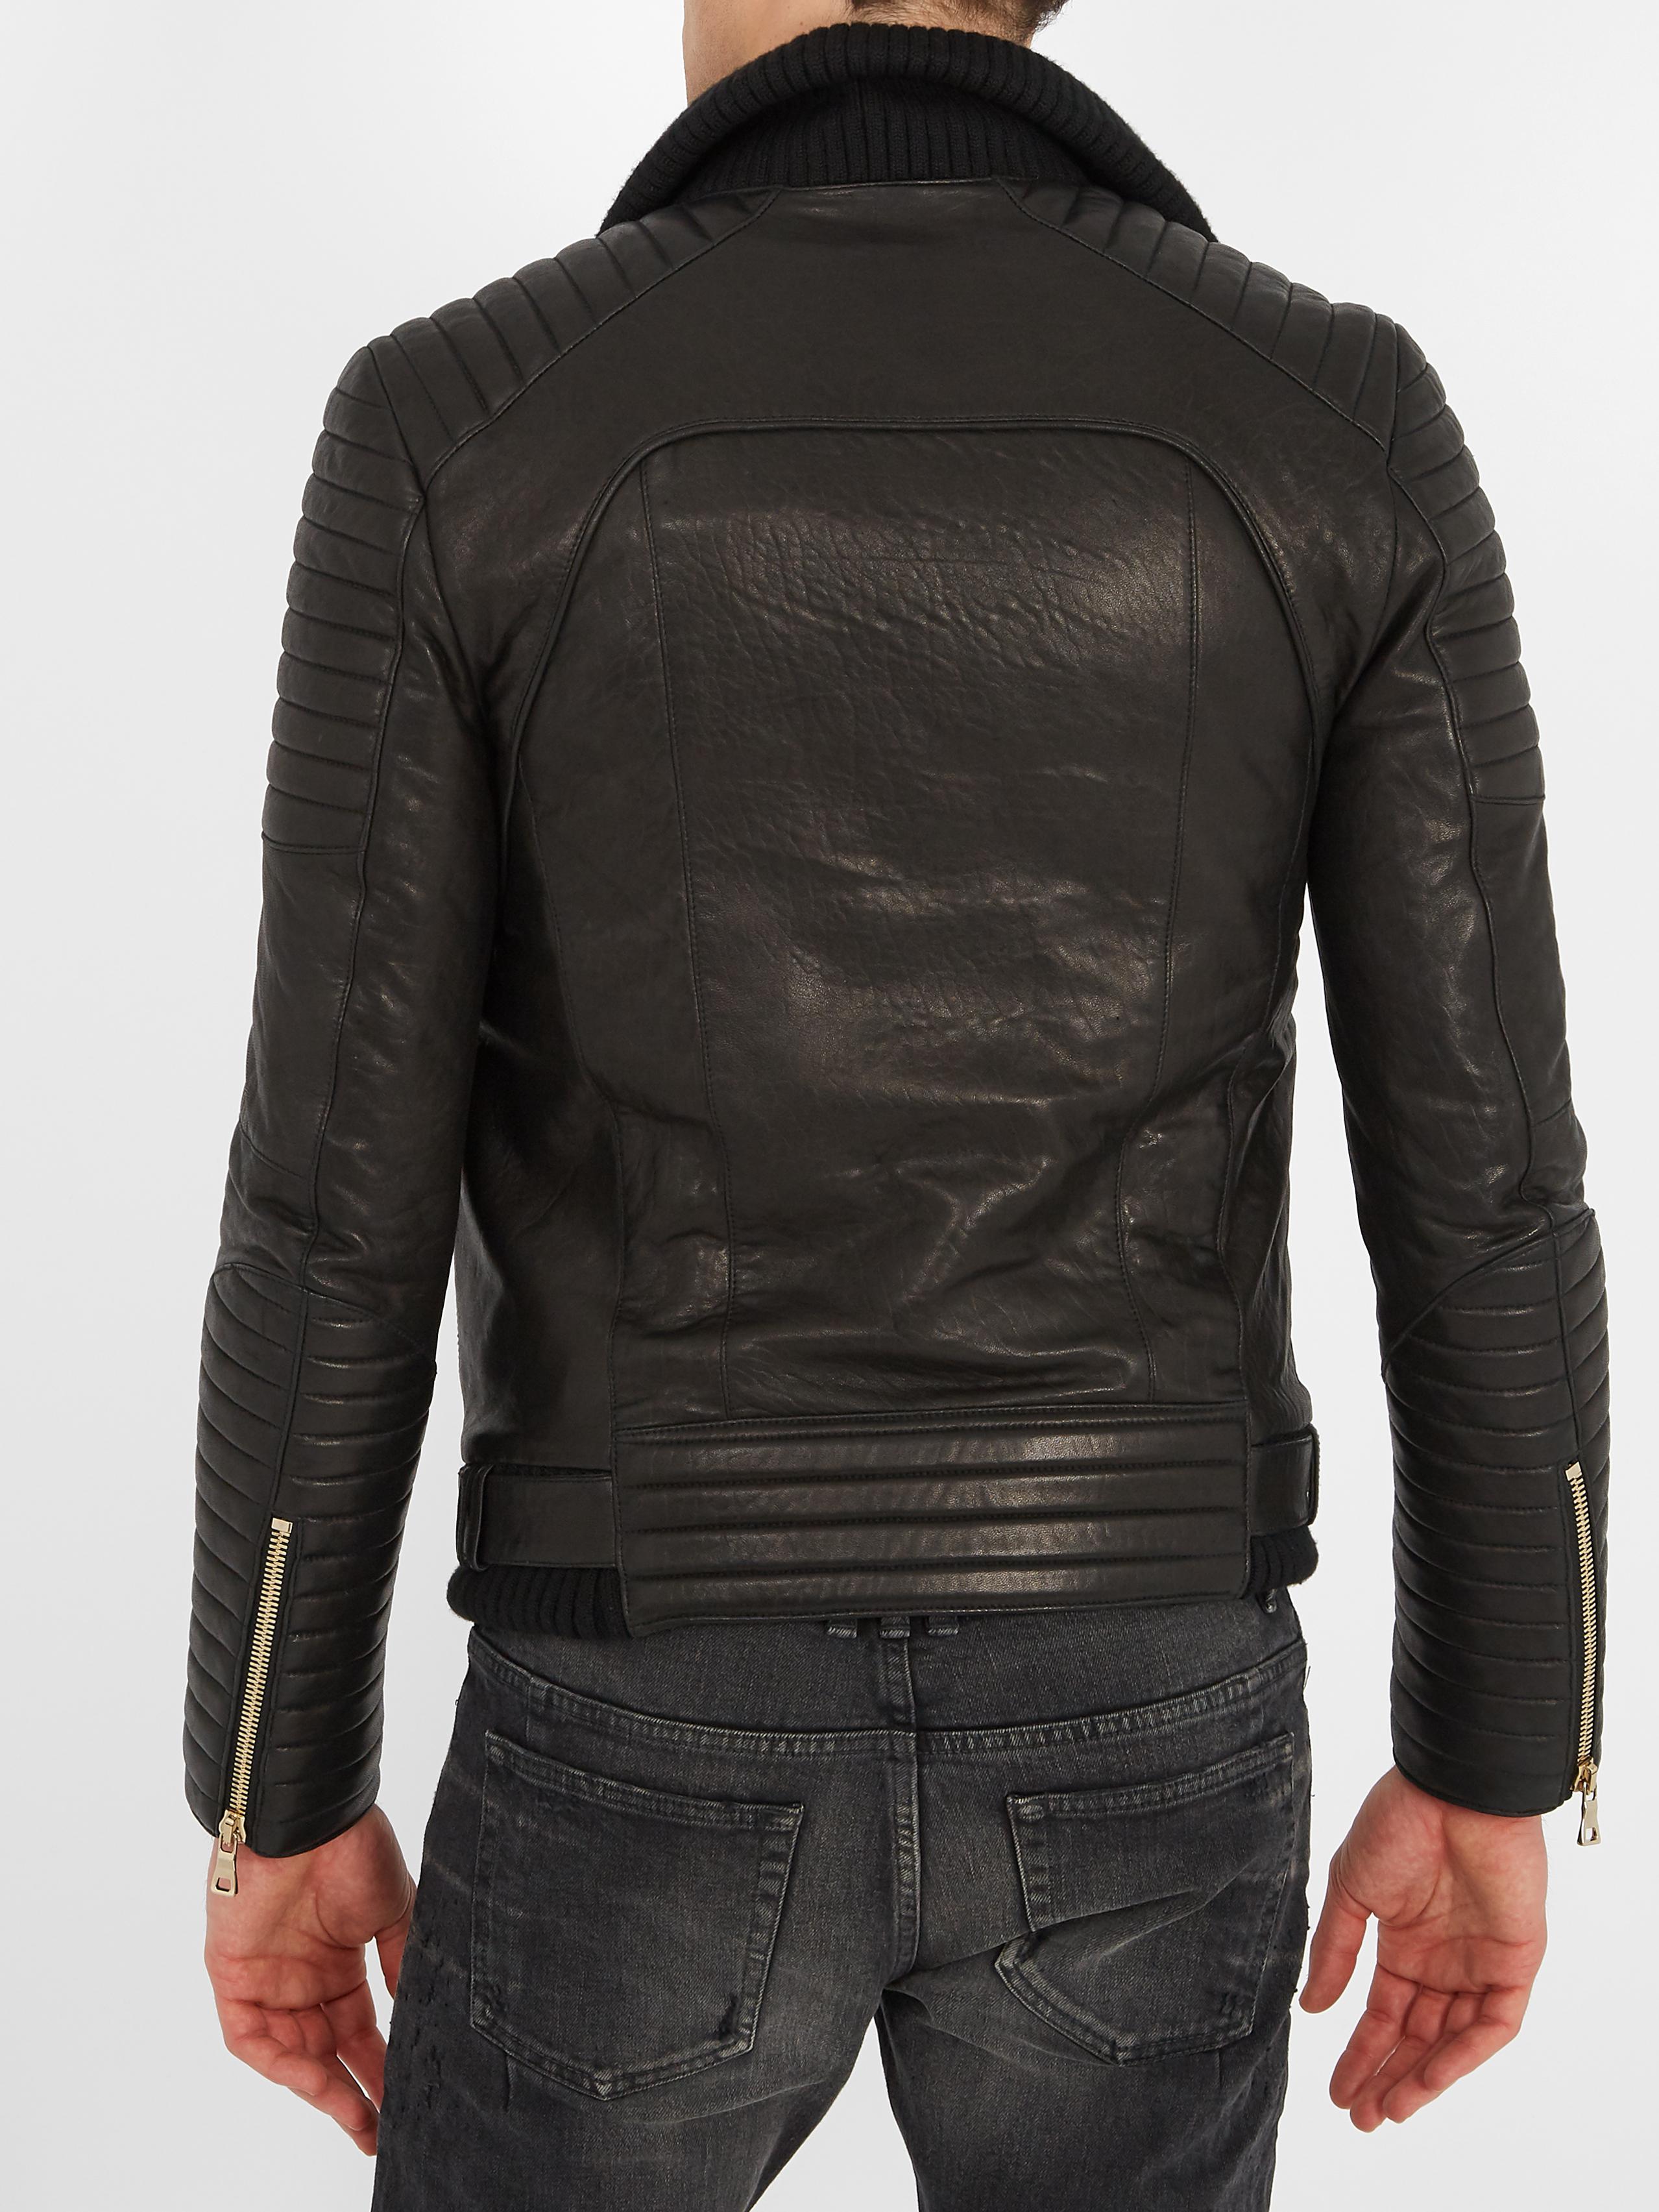 Balmain Ribbed-knit Collar Leather Jacket in Black for Men - Lyst